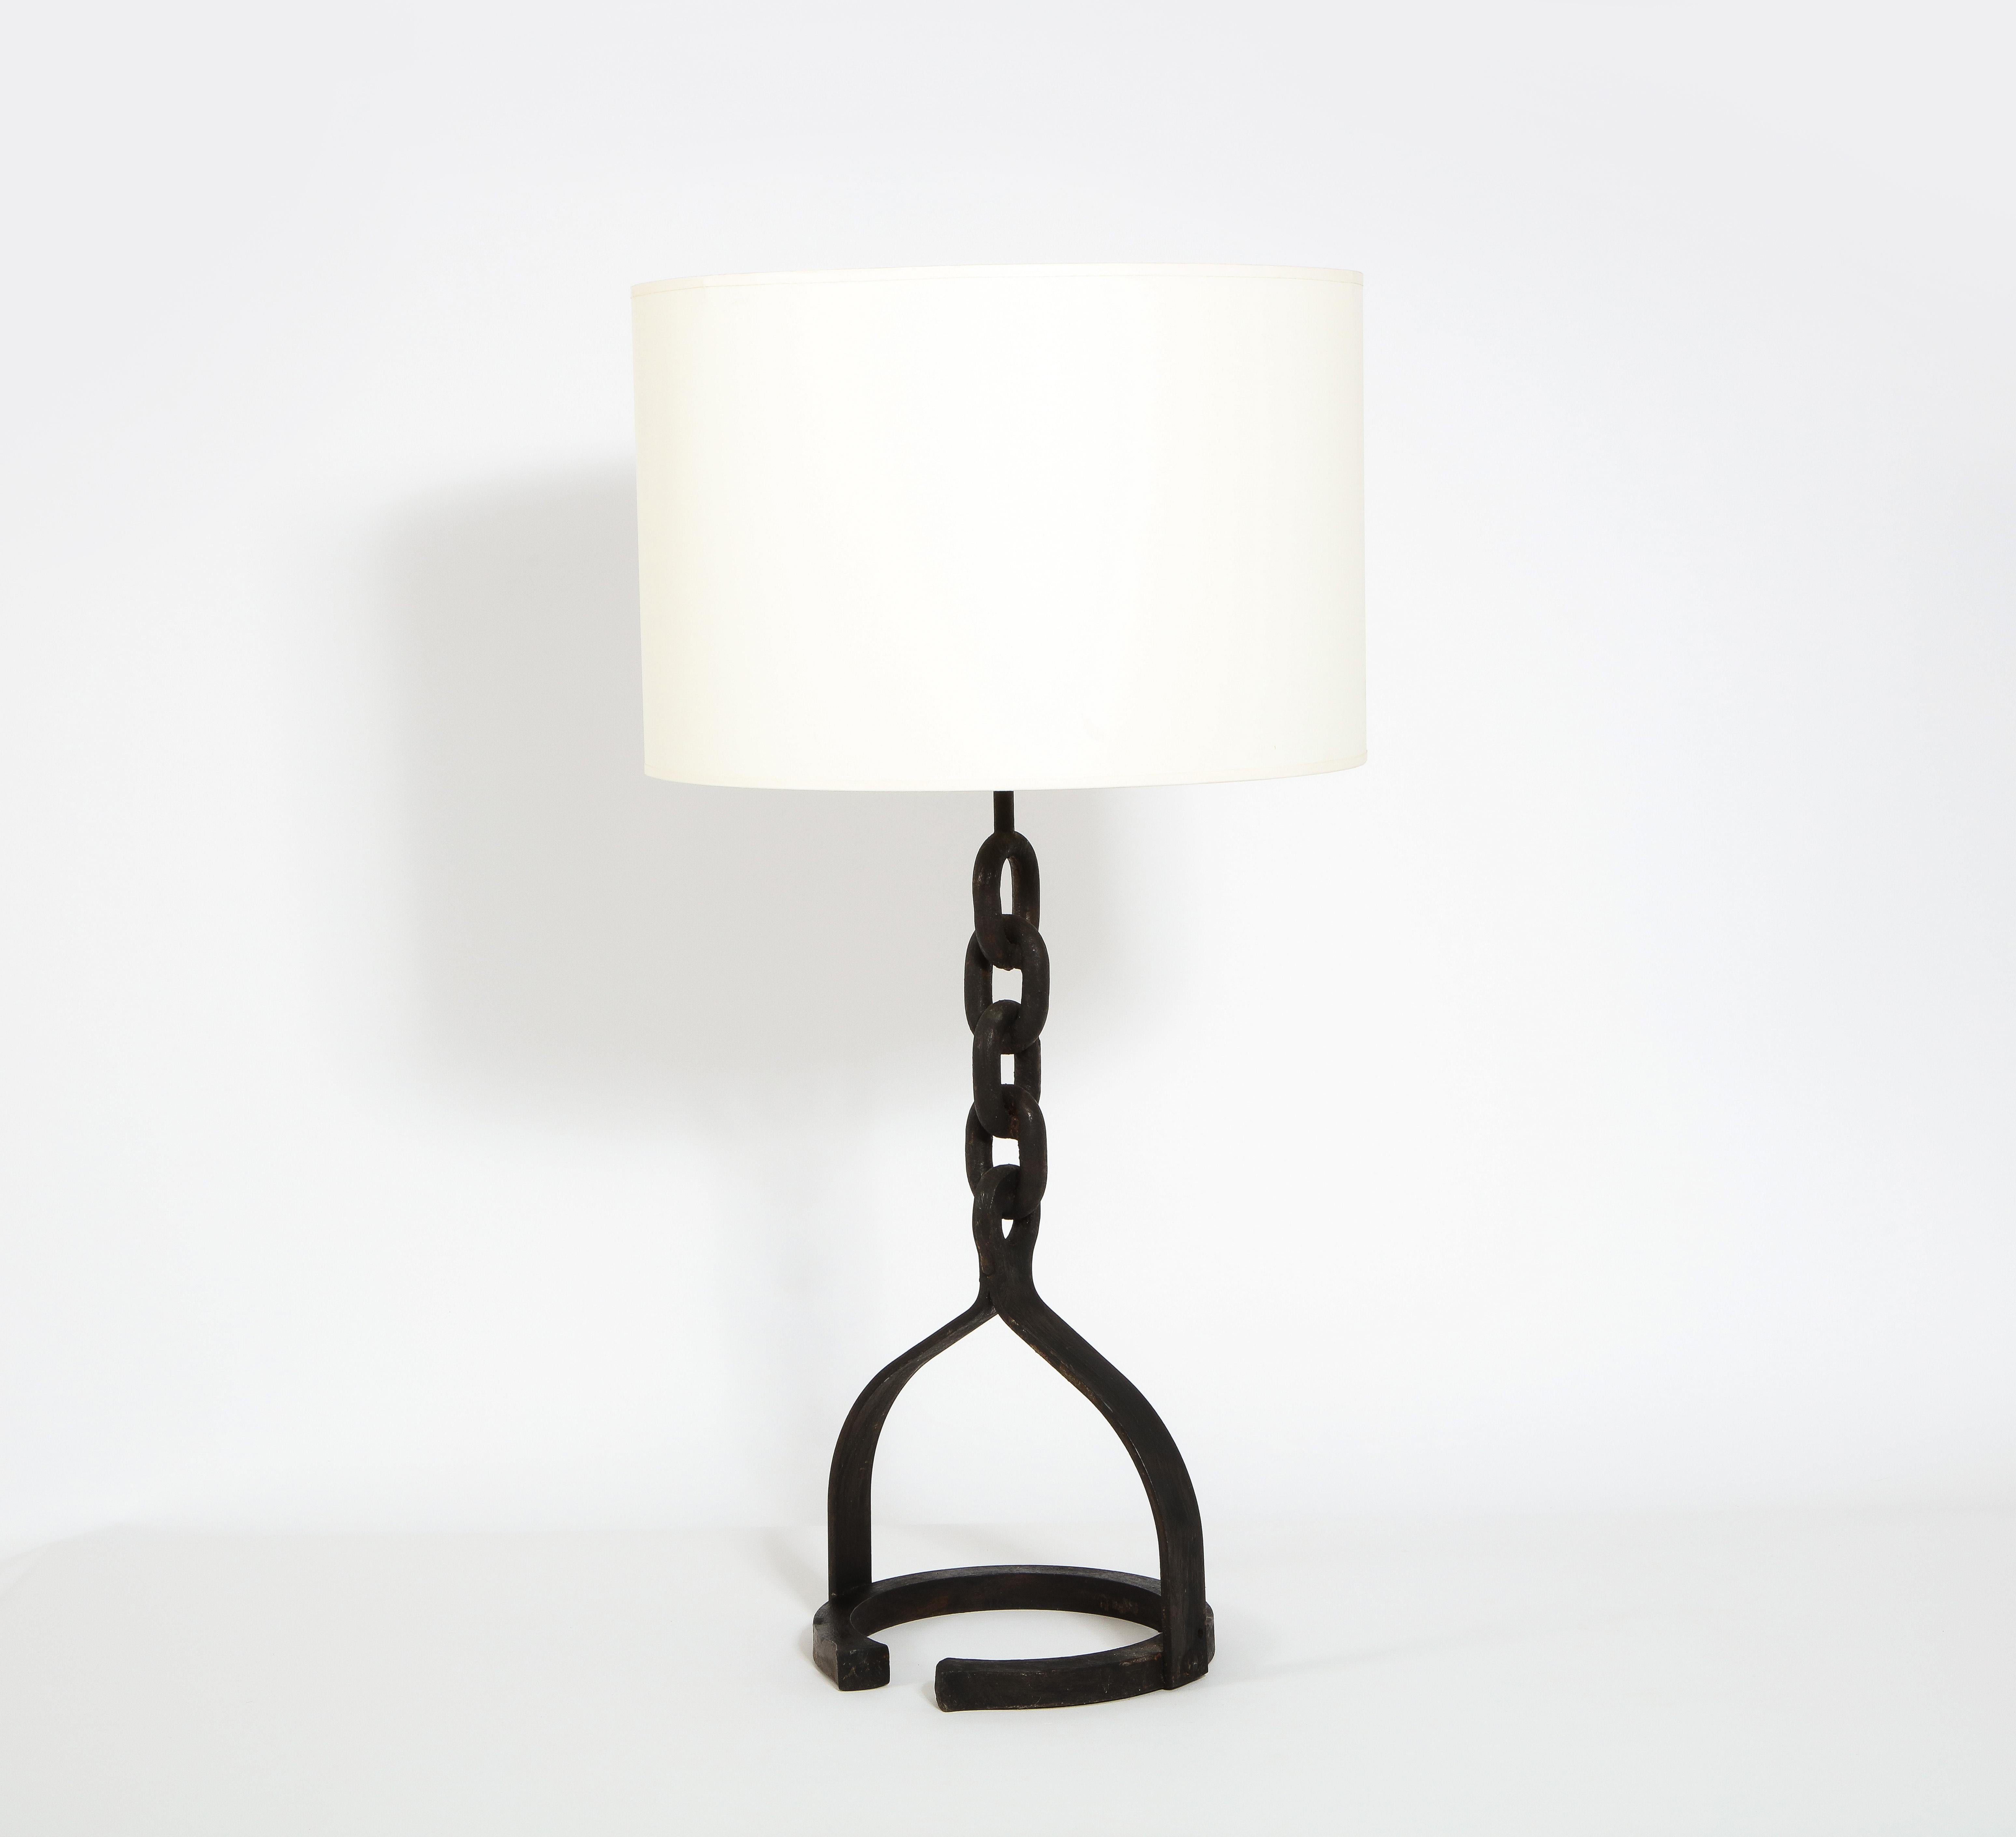 Brutalist Classic Wrought Iron Chain Motif Table Lamp, France 1960's For Sale